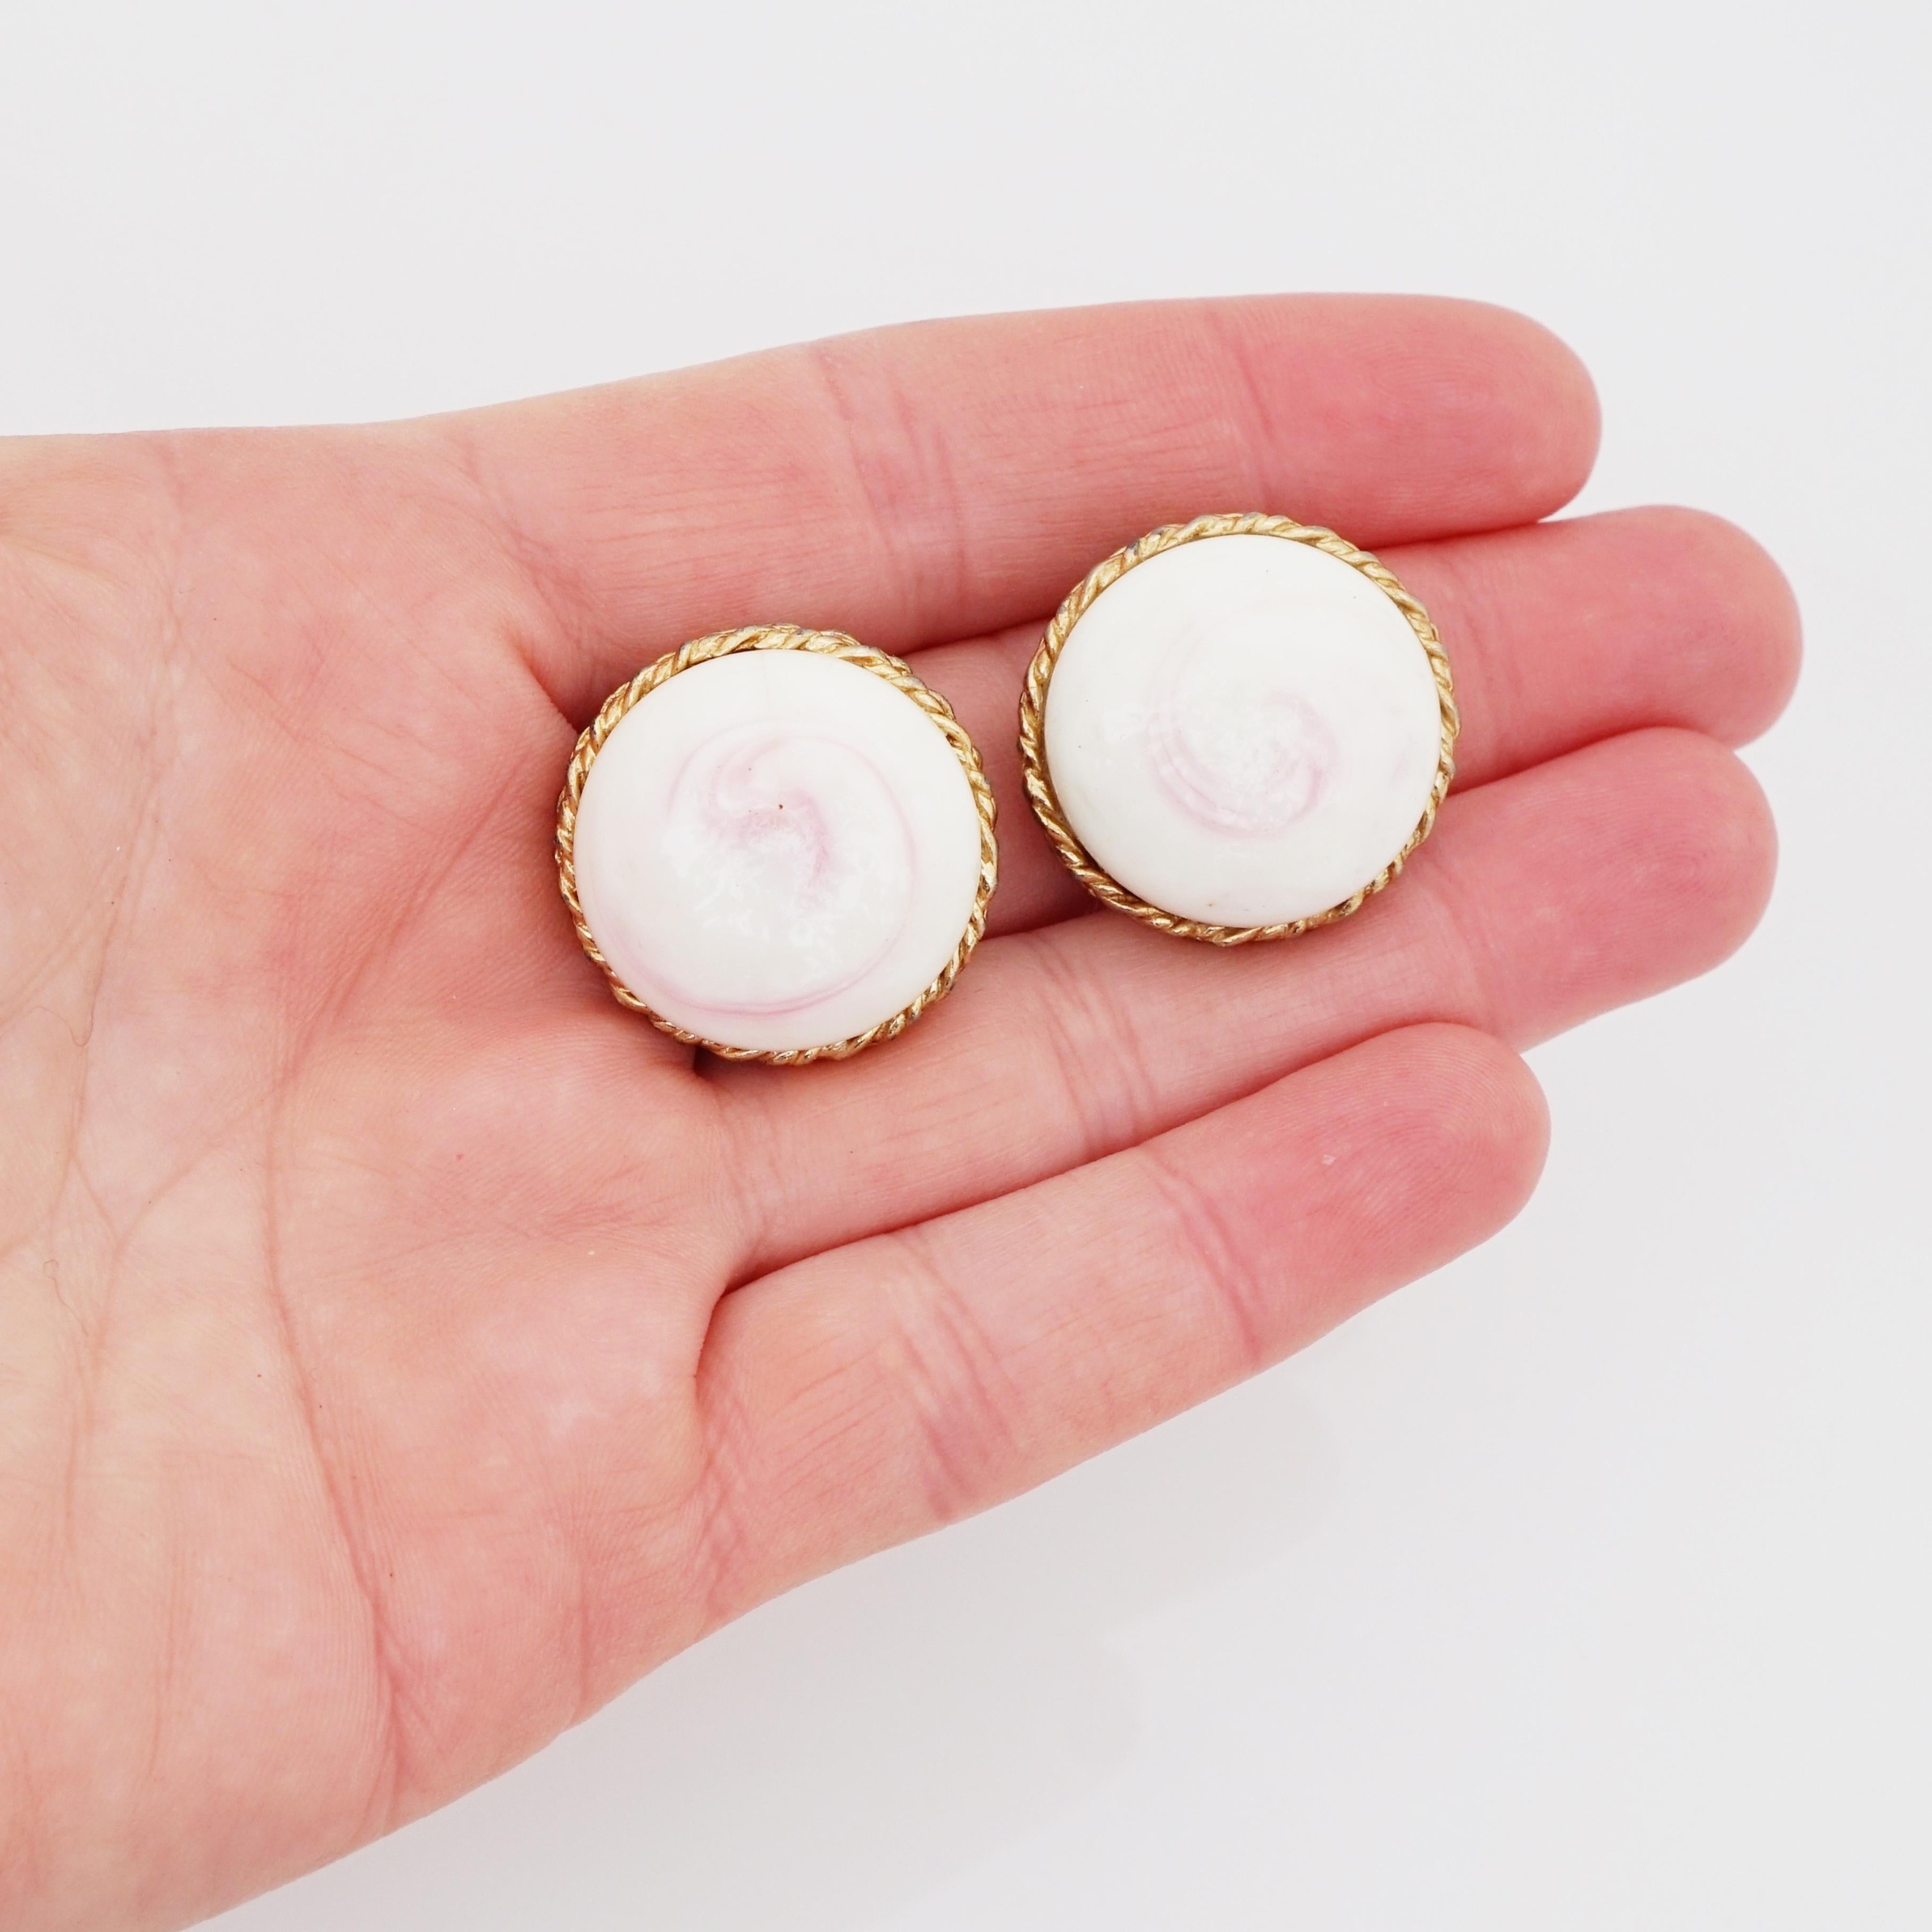 Modern Milky White Art Glass Hard Candy Earrings By Vogue, 1960s For Sale